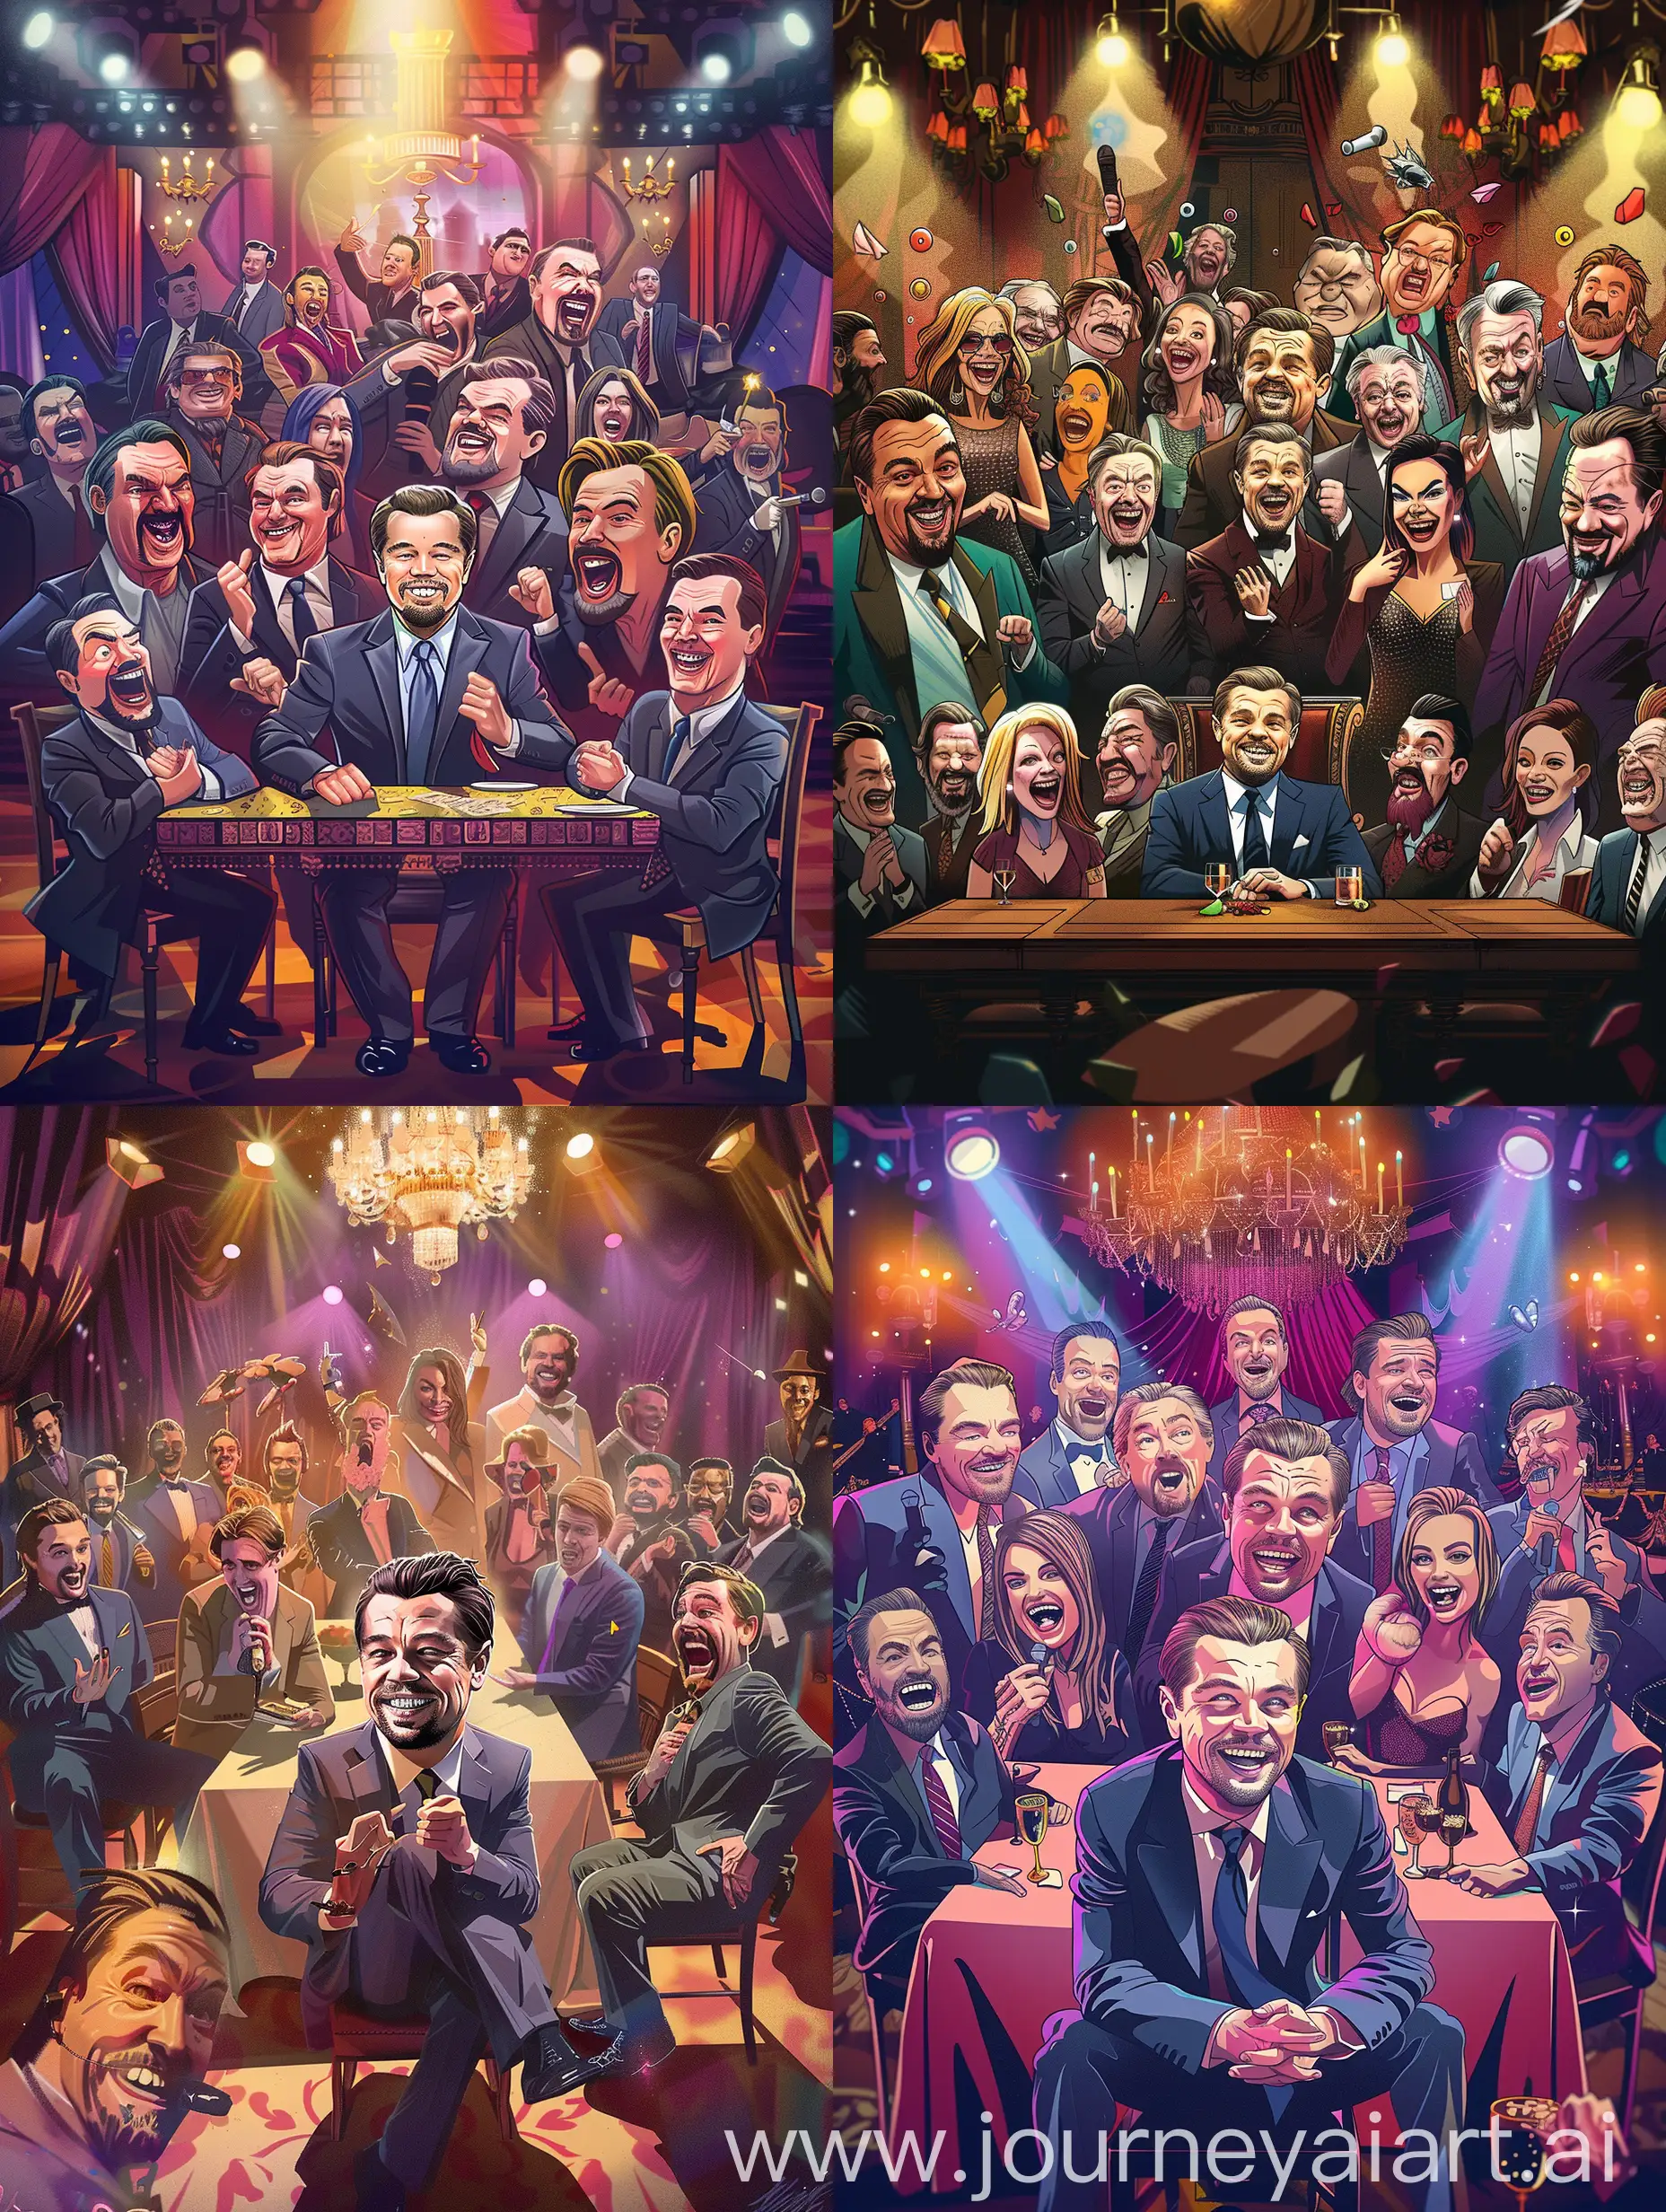 A vibrant digital illustration capturing the electrifying atmosphere of a celebrity roast featuring Leonardo DiCaprio as the guest of honor. The composition centers on DiCaprio seated at a grand banquet table adorned with lavish decor, surrounded by a diverse array of fellow actors and comedians. Each personality is depicted in exaggerated caricature, their expressions ranging from playful jest to uproarious laughter. DiCaprio, dressed in a tailored suit, sits with a mix of amusement and mock apprehension as various speakers take turns roasting him. Bright stage lights cast dramatic shadows, enhancing the theatrical ambiance of the event. The background showcases a luxurious ballroom setting, complete with ornate chandeliers and opulent furnishings, adding to the glitz and glamour of the occasion. Laughter echoes through the room as witty remarks and playful jabs fill the air, capturing the essence of this comedic spectacle. --ar 9:11